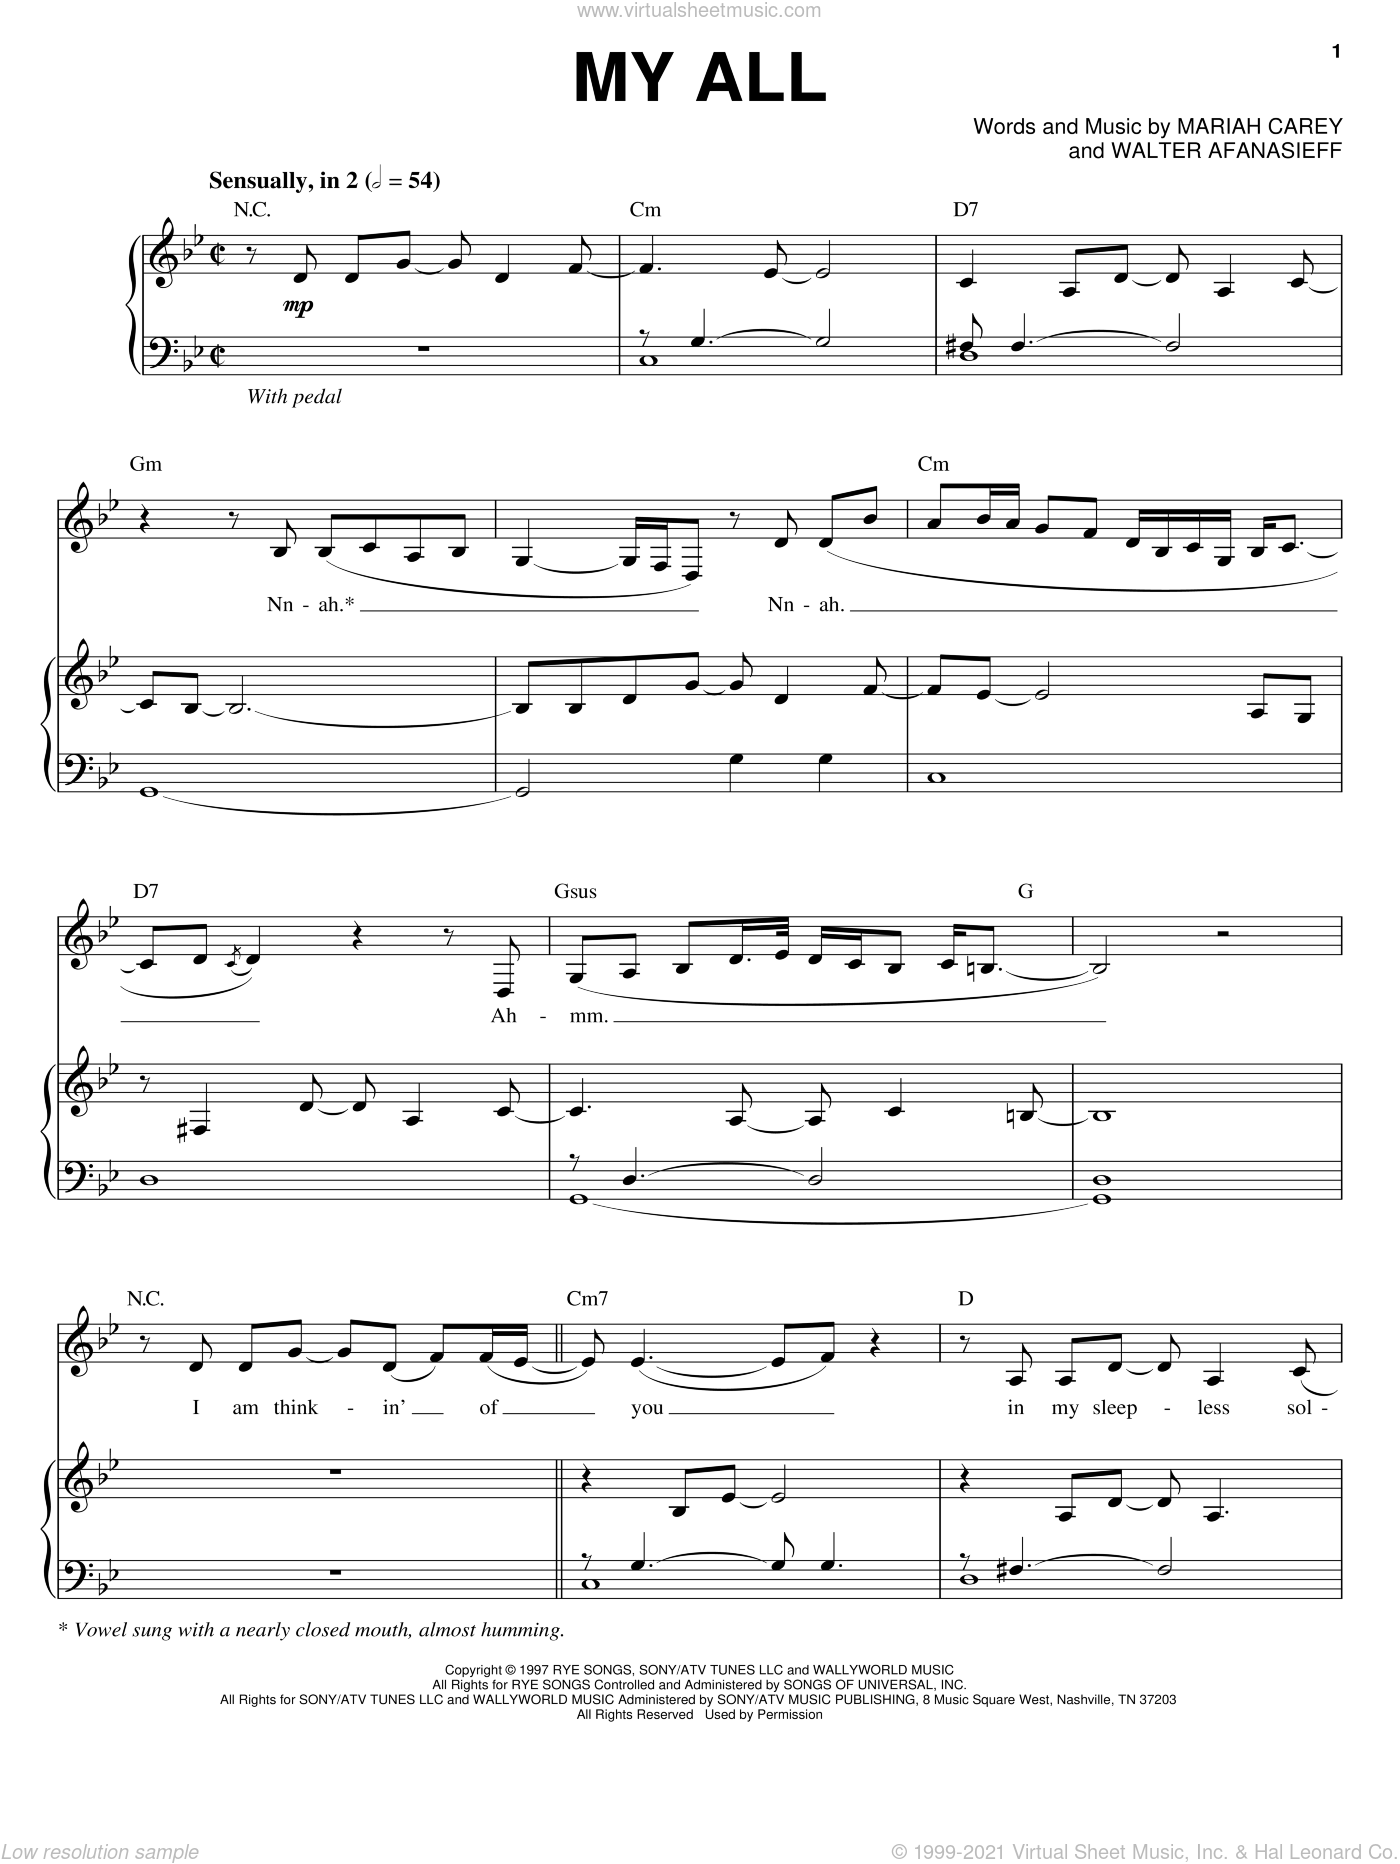 Carey - My All sheet music for voice, piano or guitar [PDF]